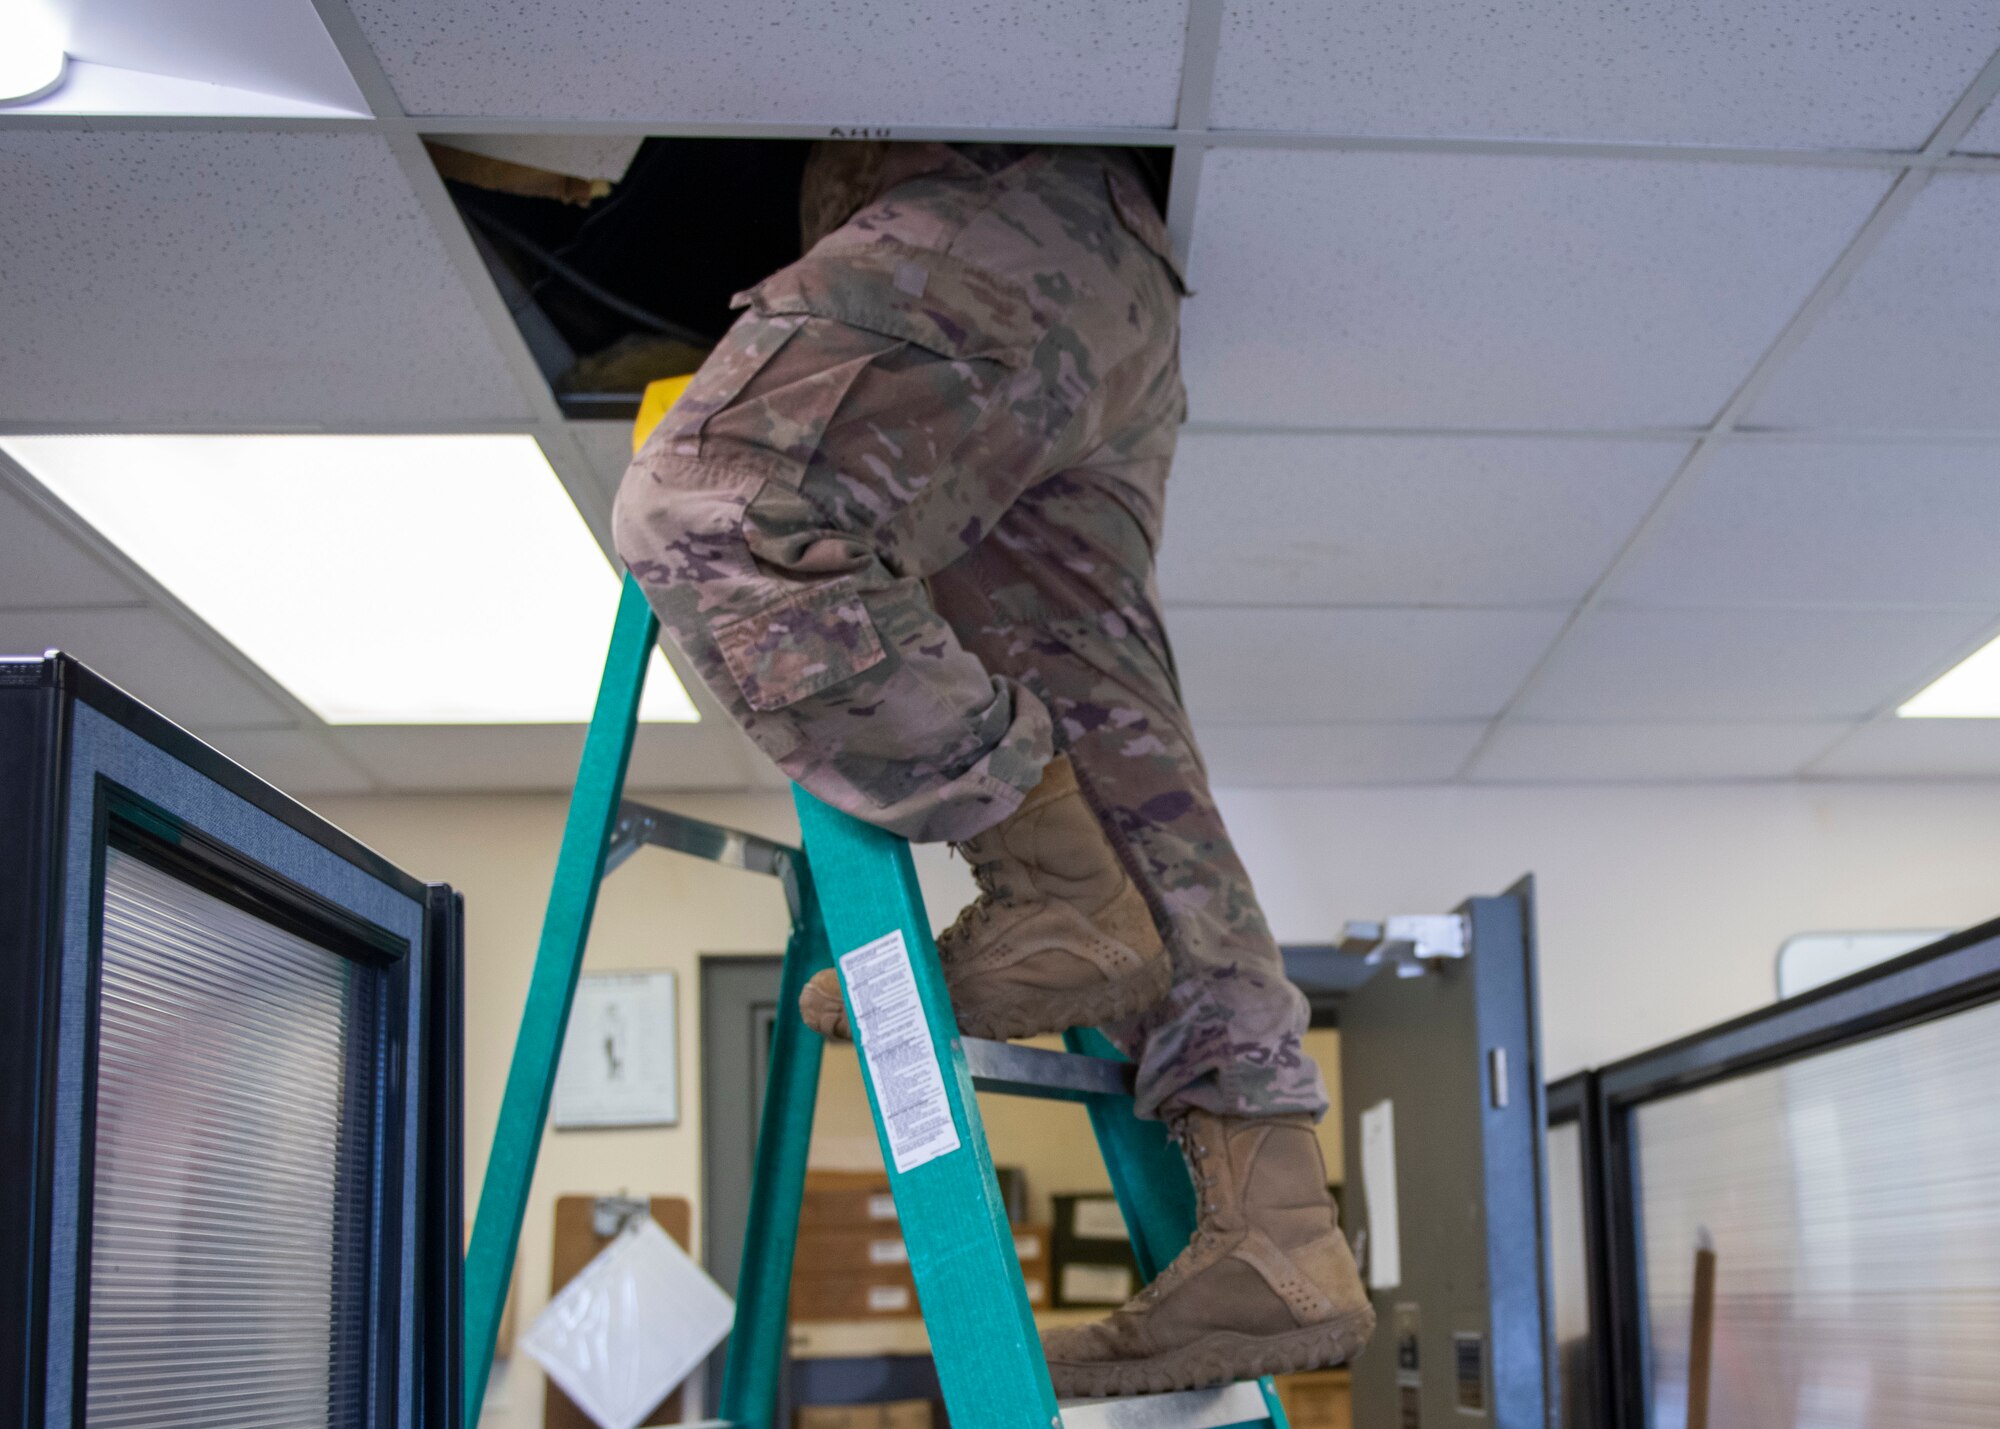 Staff Sgt. Mitchell Cole, 4th Civil Engineer Squadron heating, ventilation, air conditioning and refrigeration technician, climbs into a drop ceiling to access an indoor air conditioning unit at Seymour Johnson Air Force Base, North Carolina, June 14, 2021.